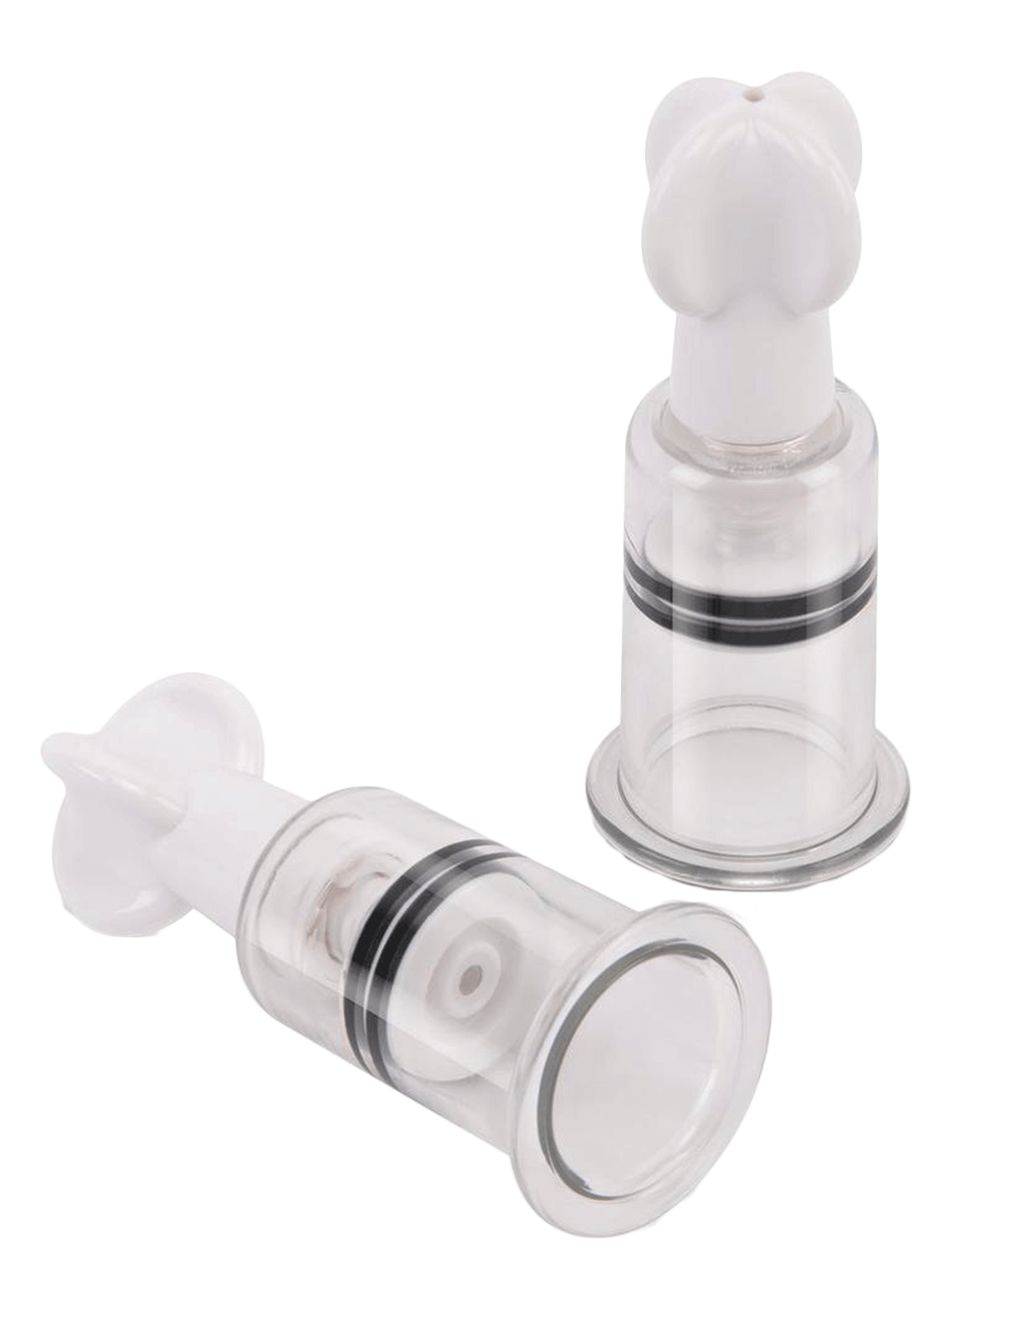 Size Up Twisty Nipple Suckers - XL - Product